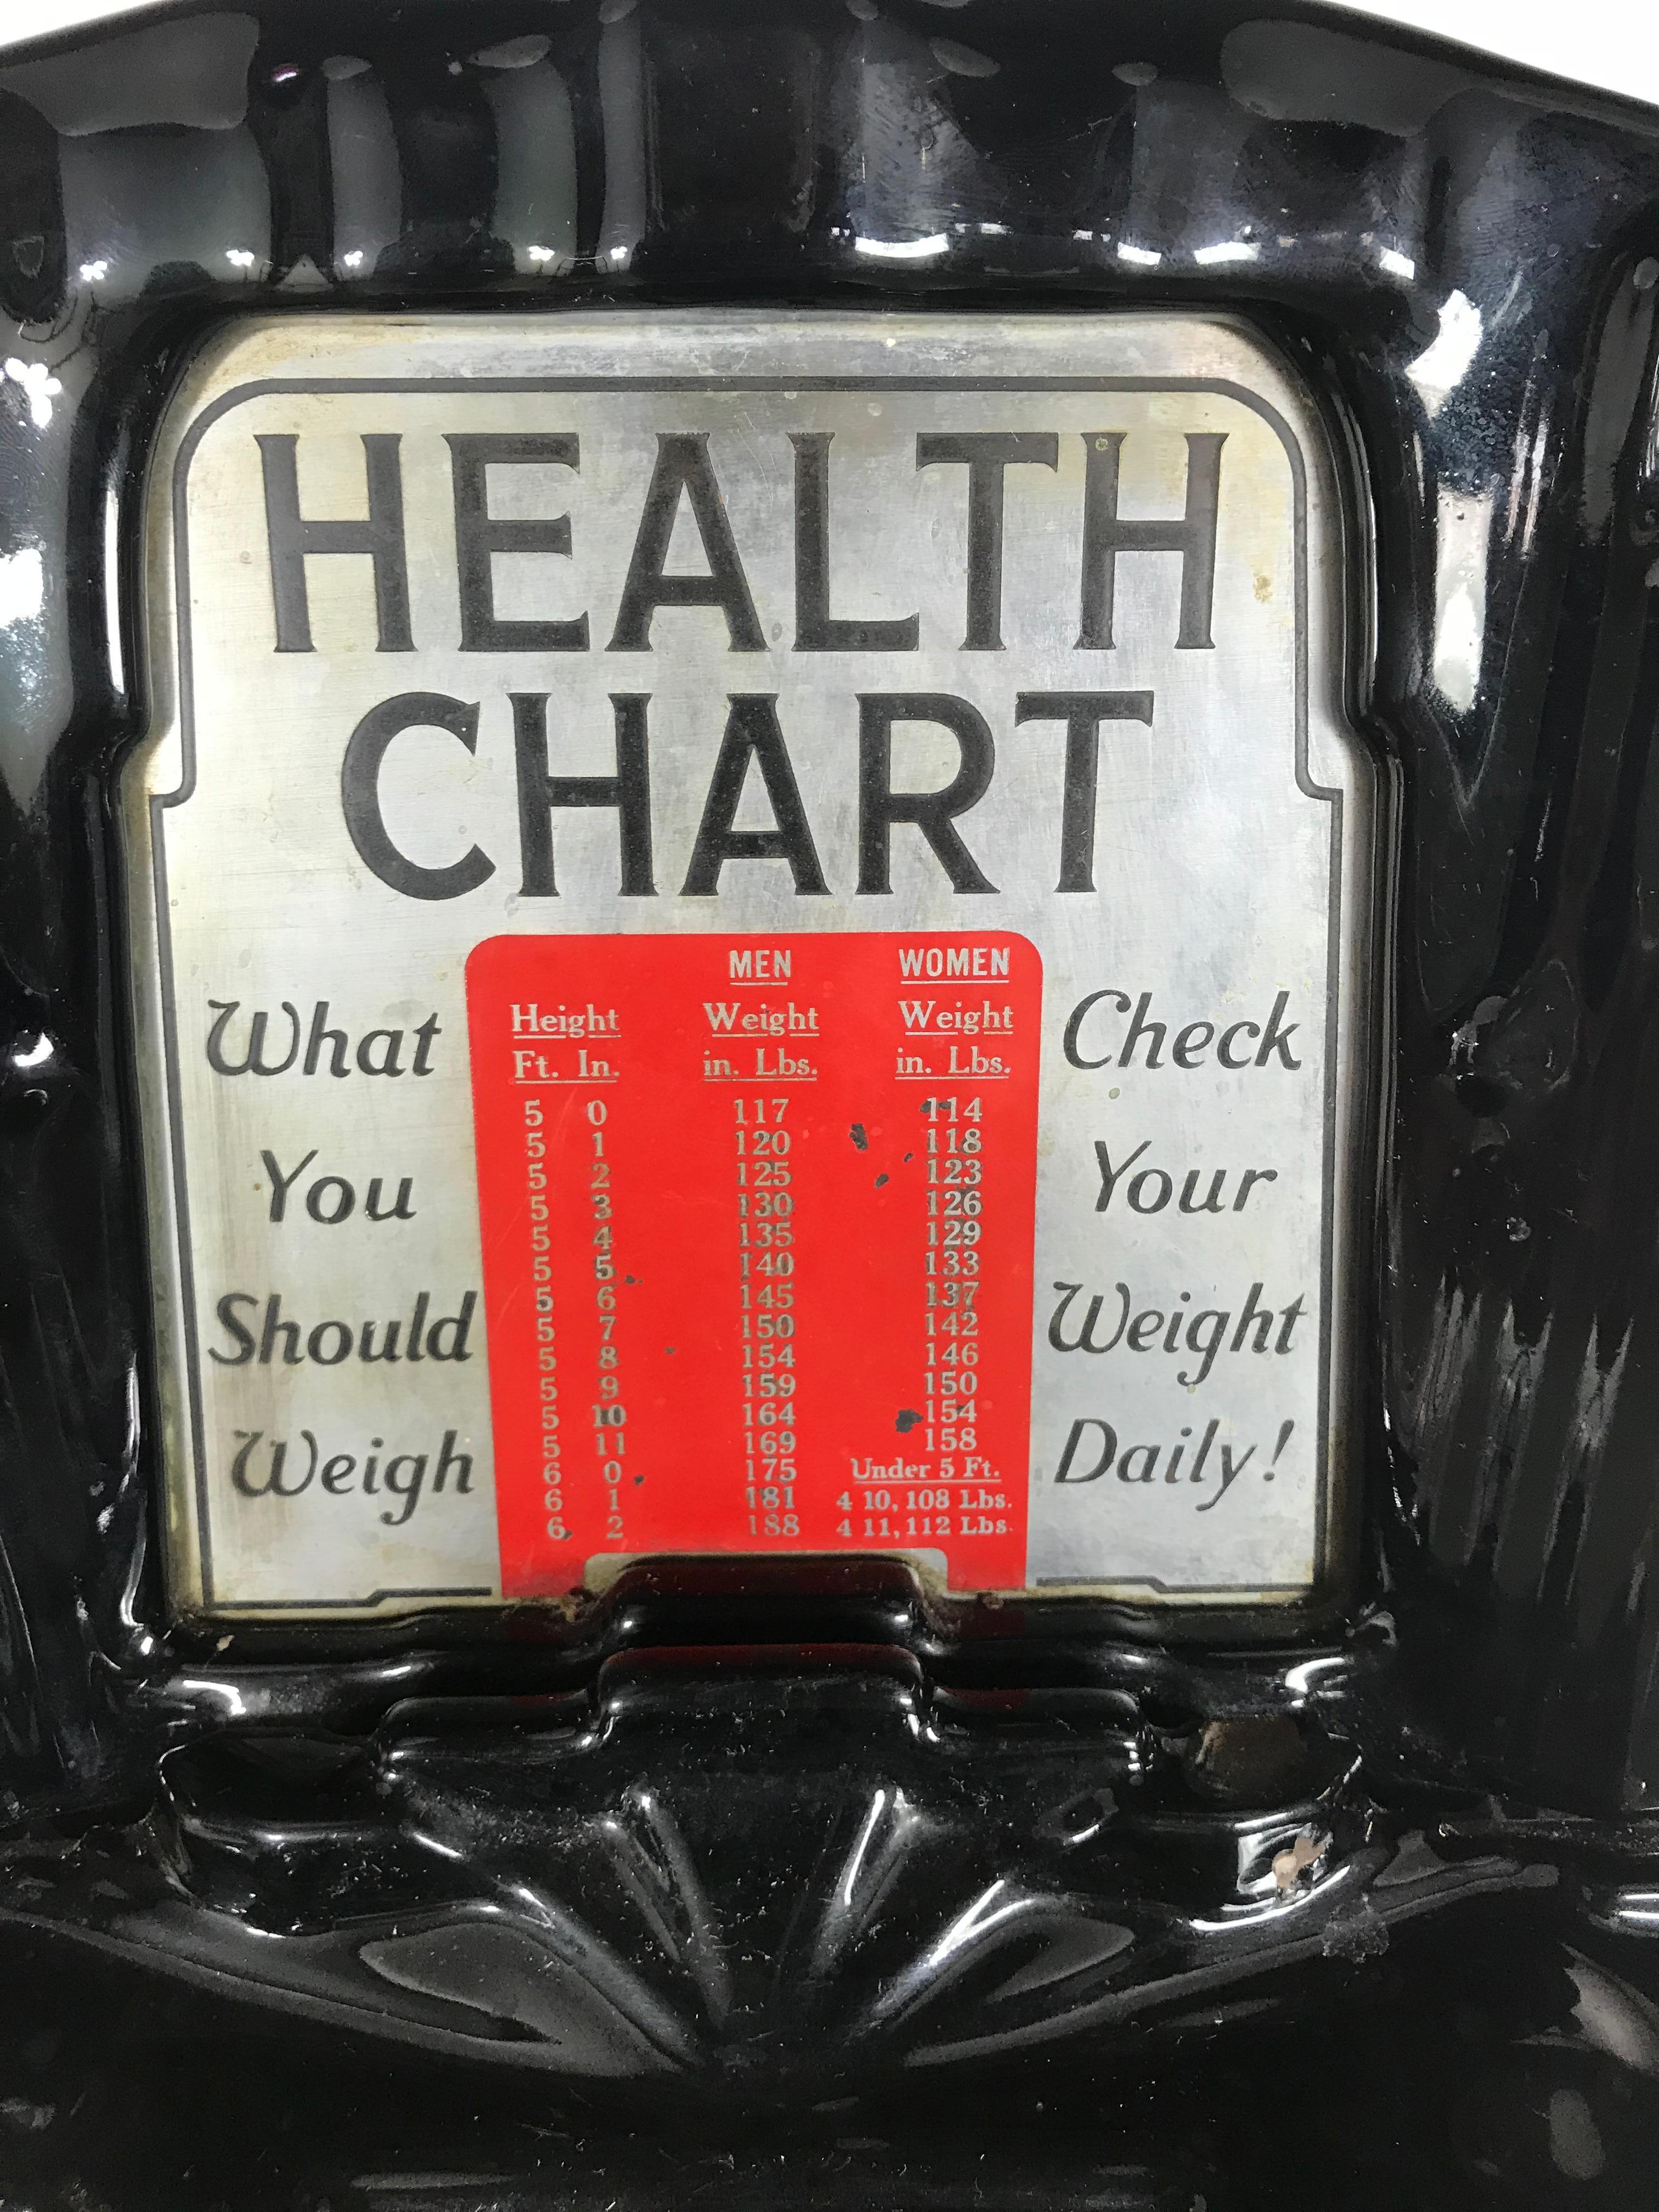 American Chicago Mills Novelty Co. Art Deco Penny Floor Drugstore Scale with Health Chart